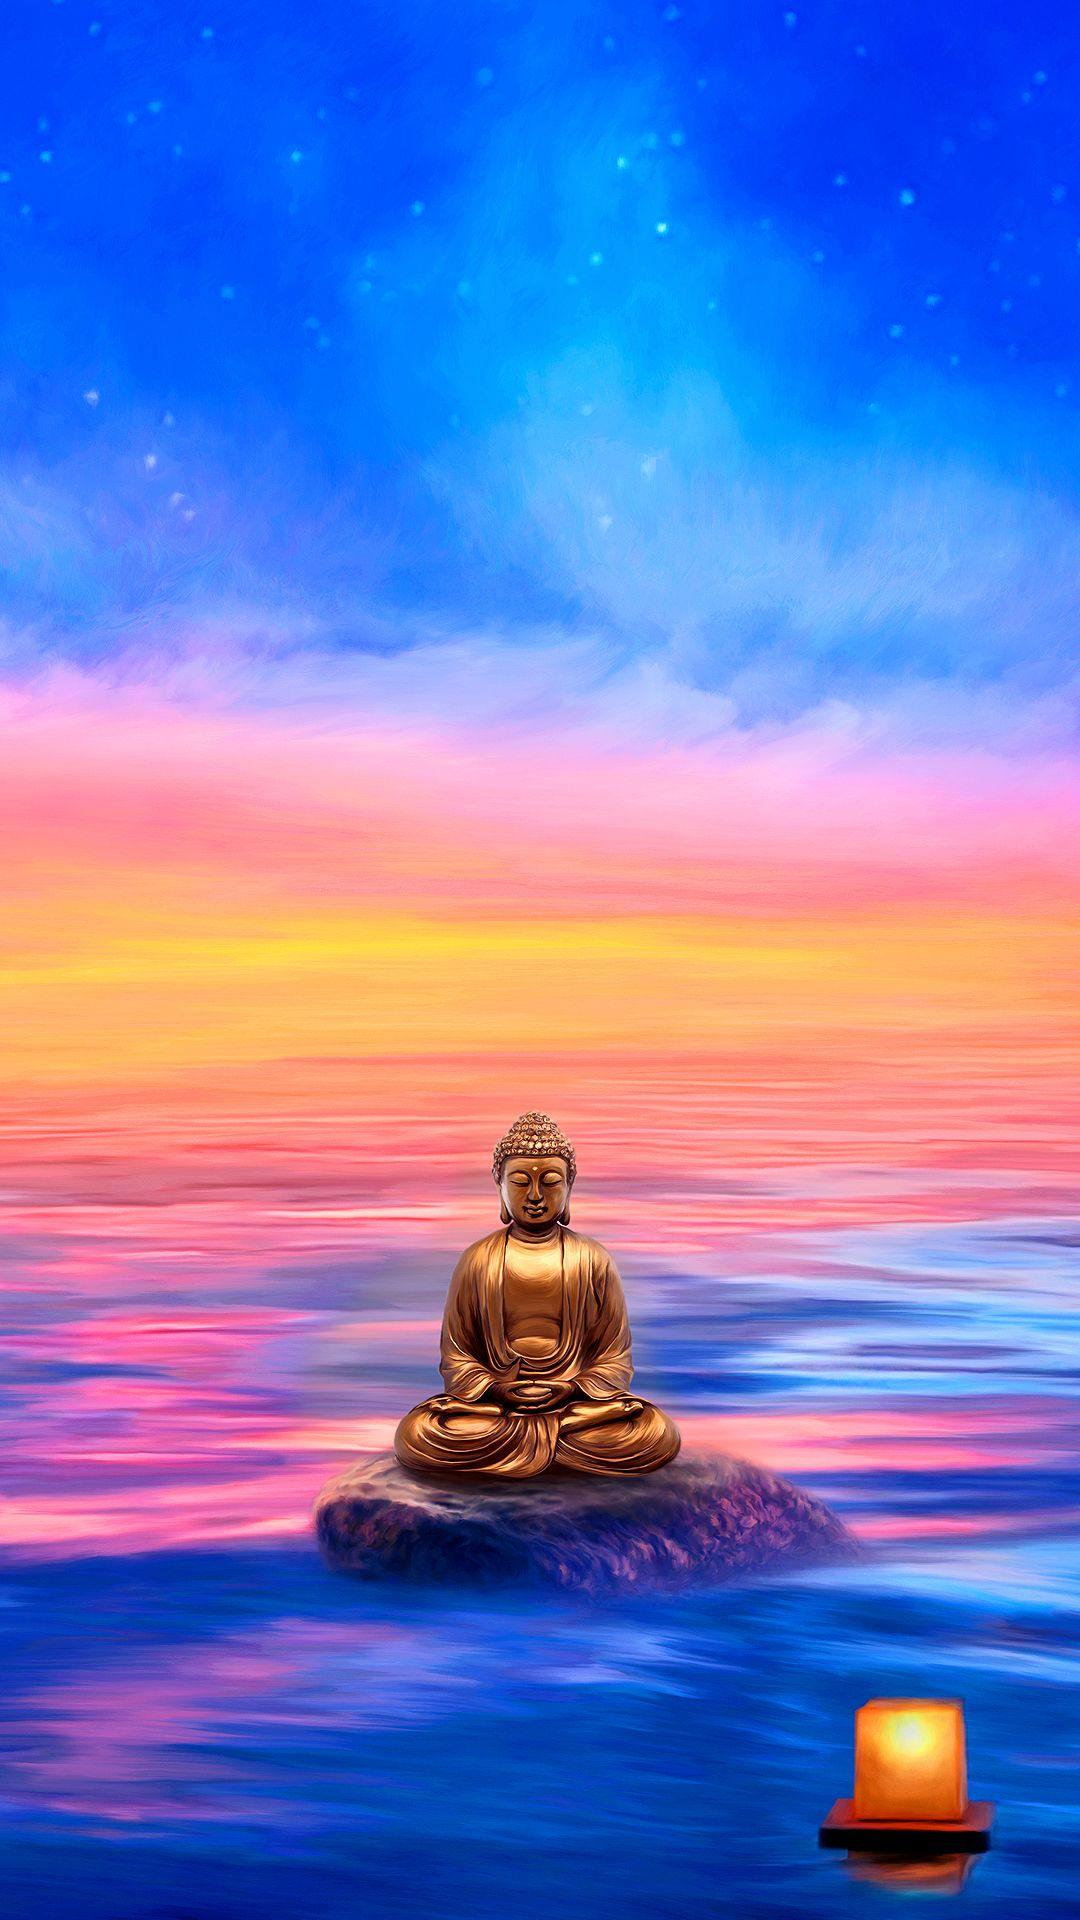 Buddha Wallpaper for Mobile Devices